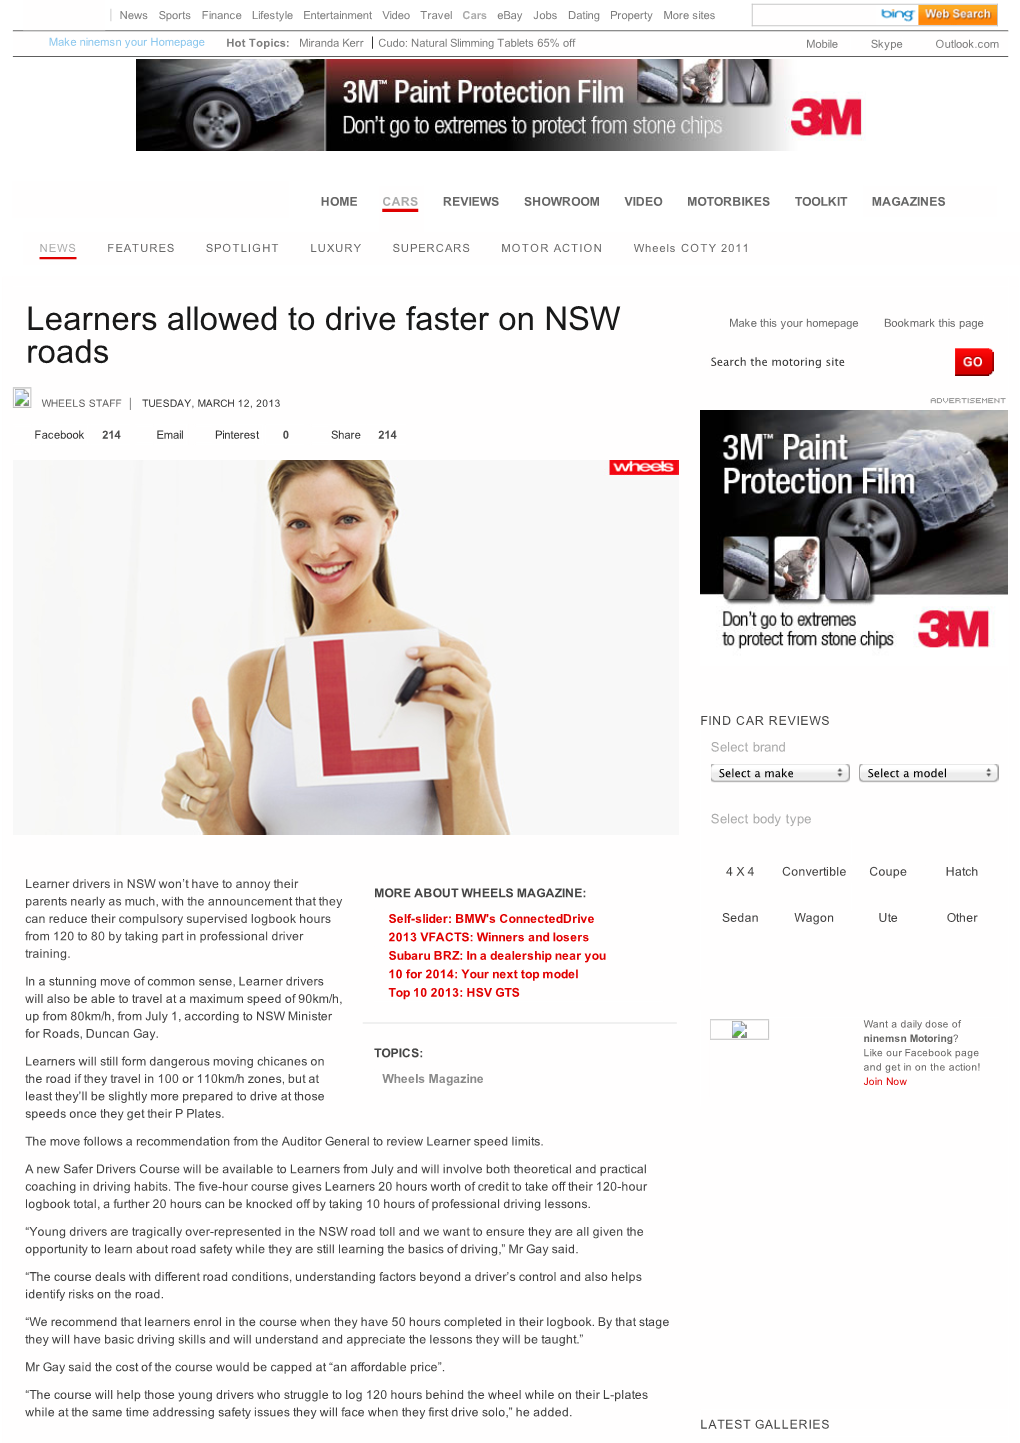 Learners Allowed to Drive Faster on NSW Roads